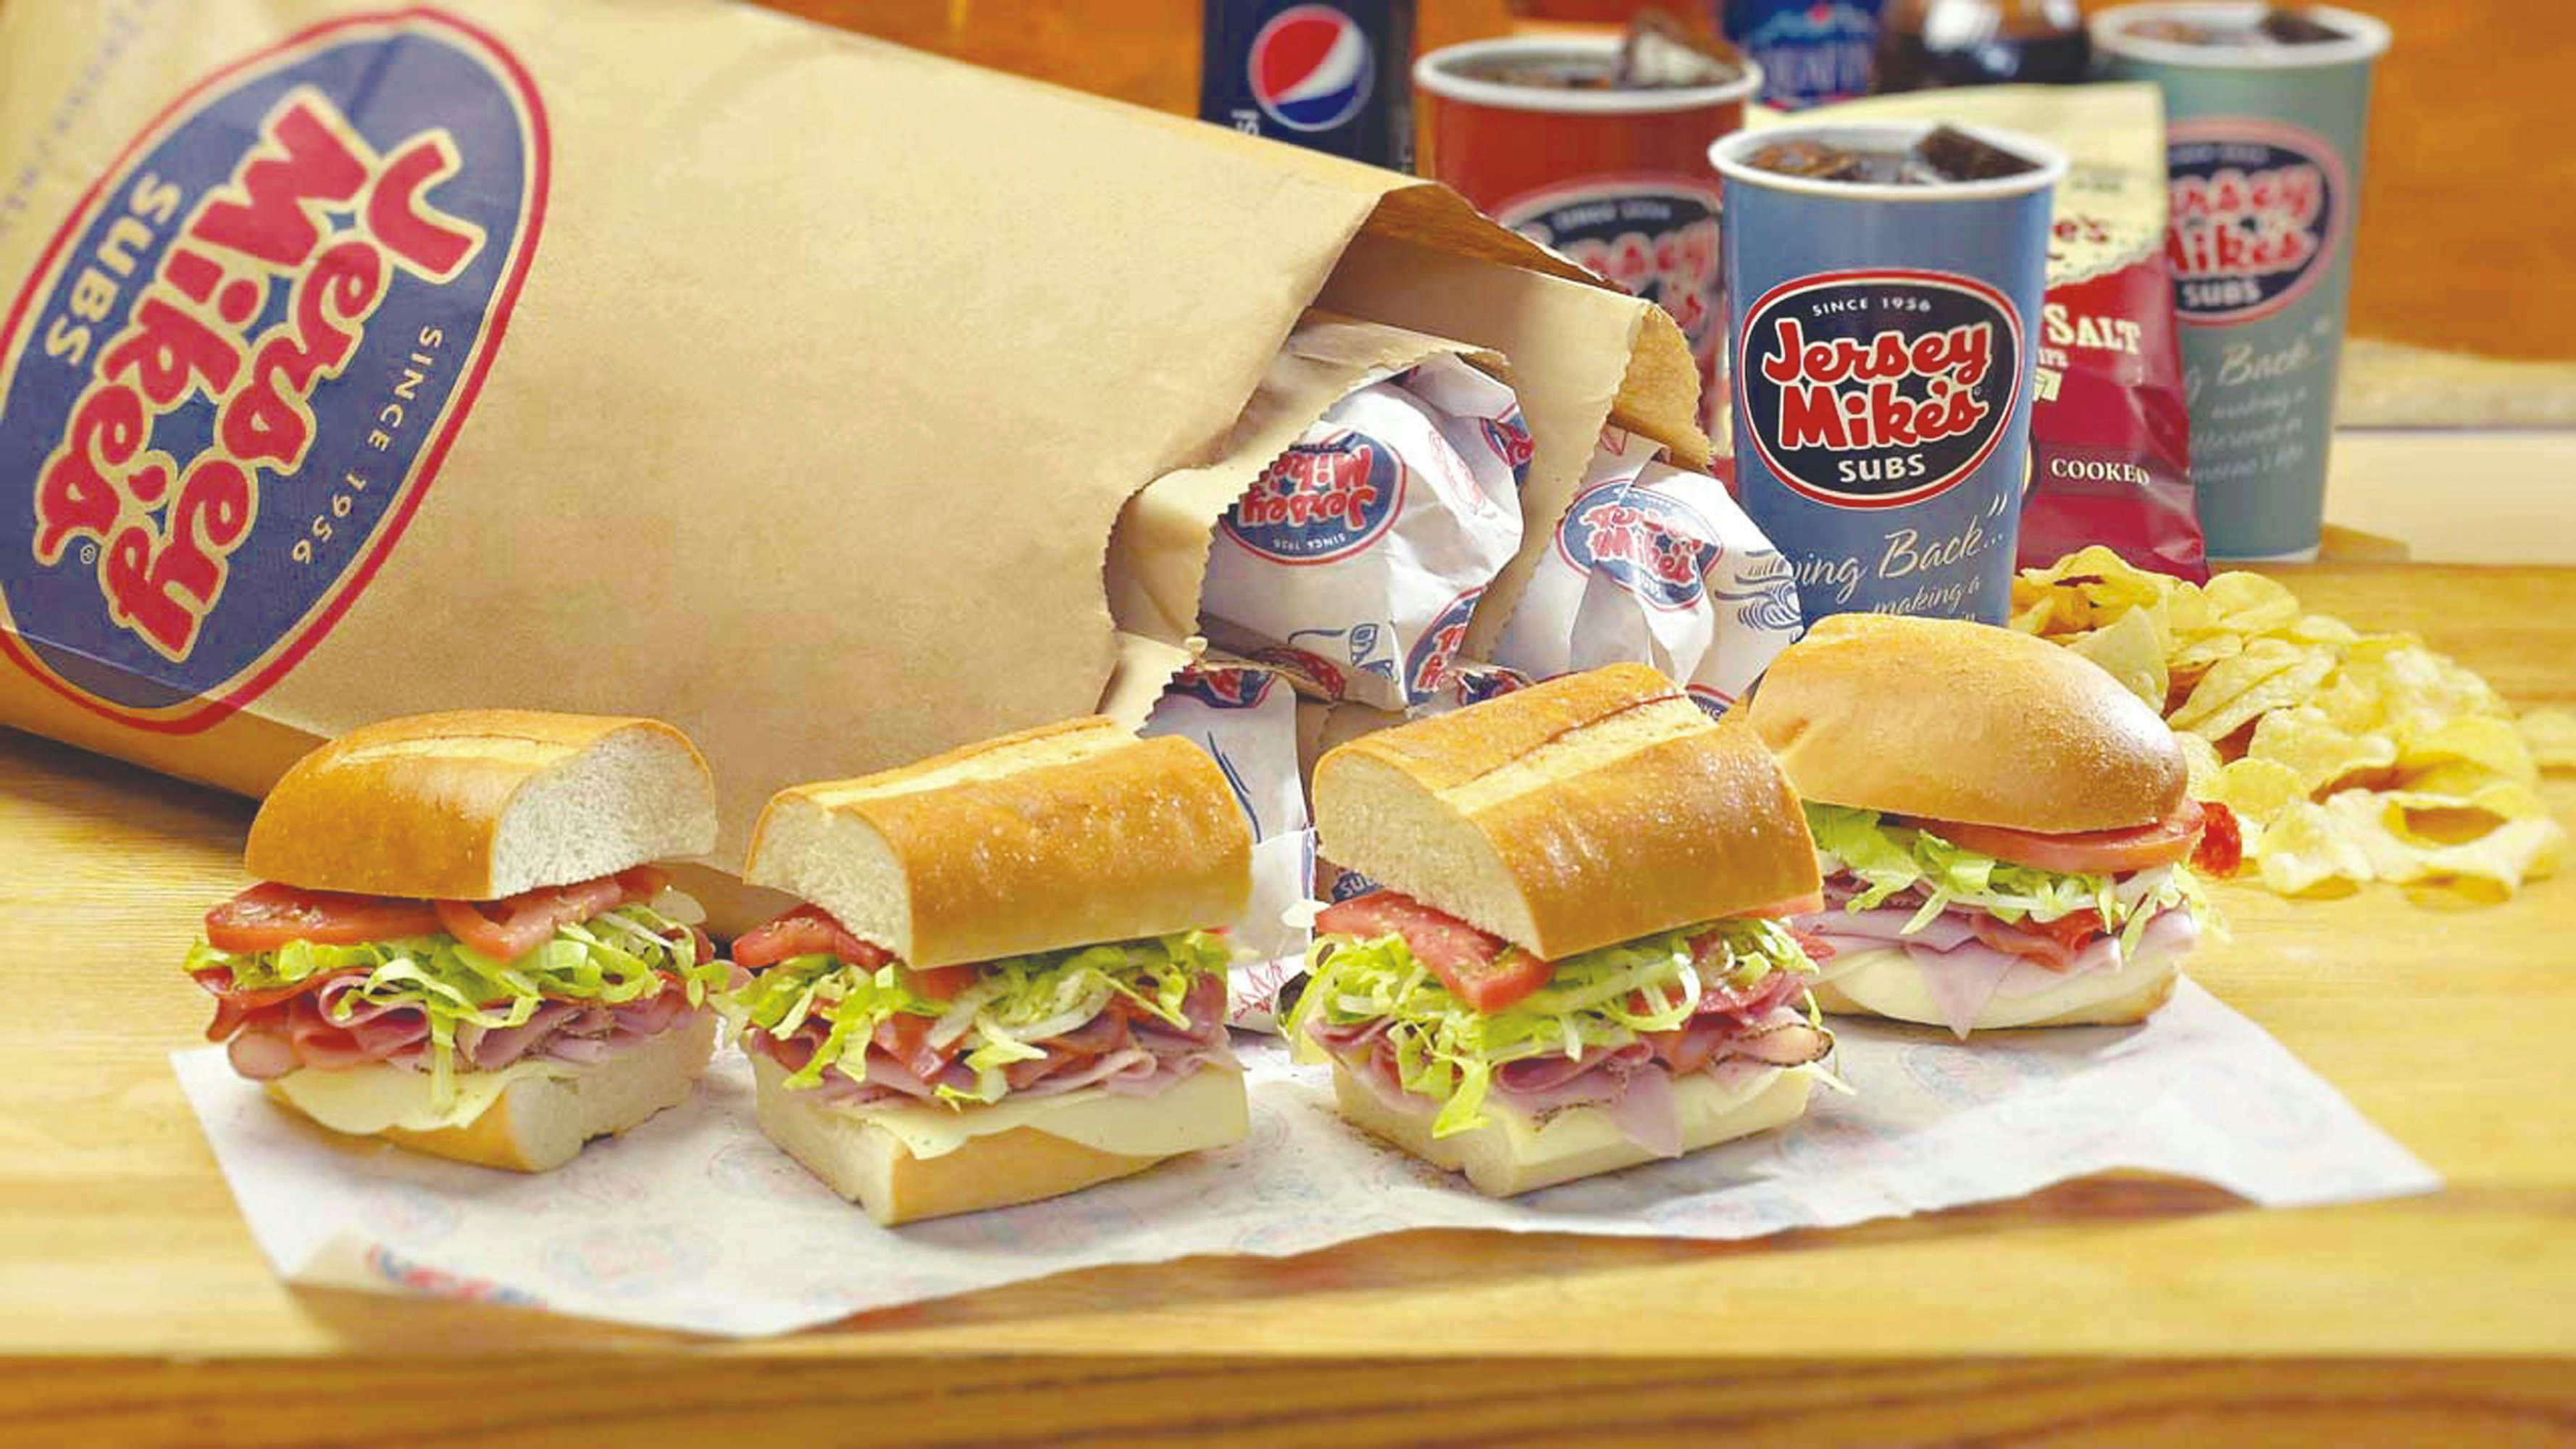 Jersey Mike's Subs - E. Grand River Ave in East Lansing - Highlight